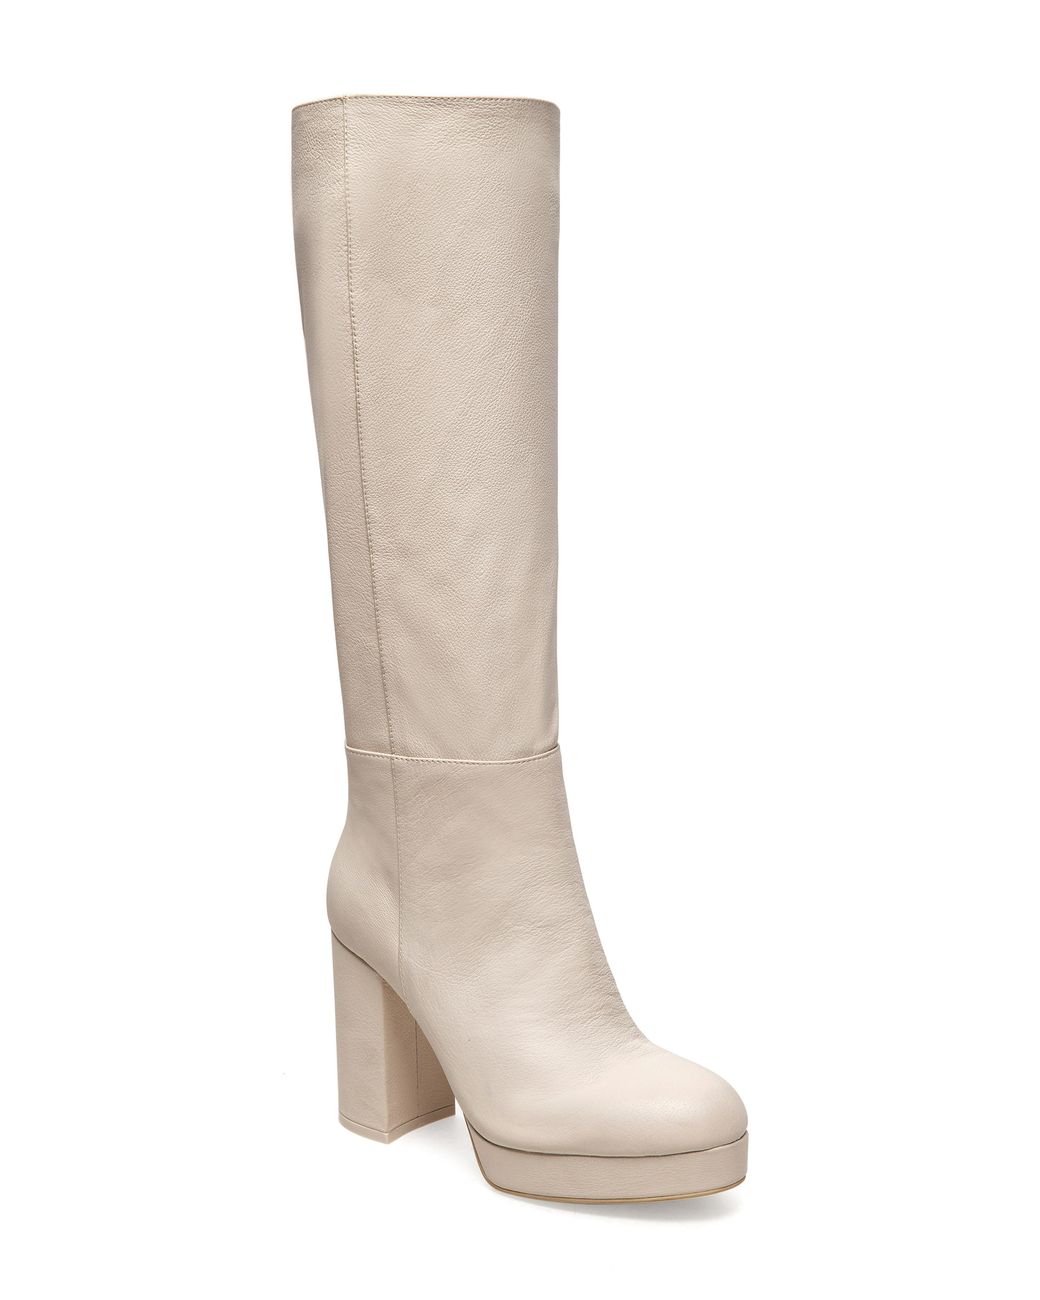 Silent D Yelona Knee High Boot in White | Lyst